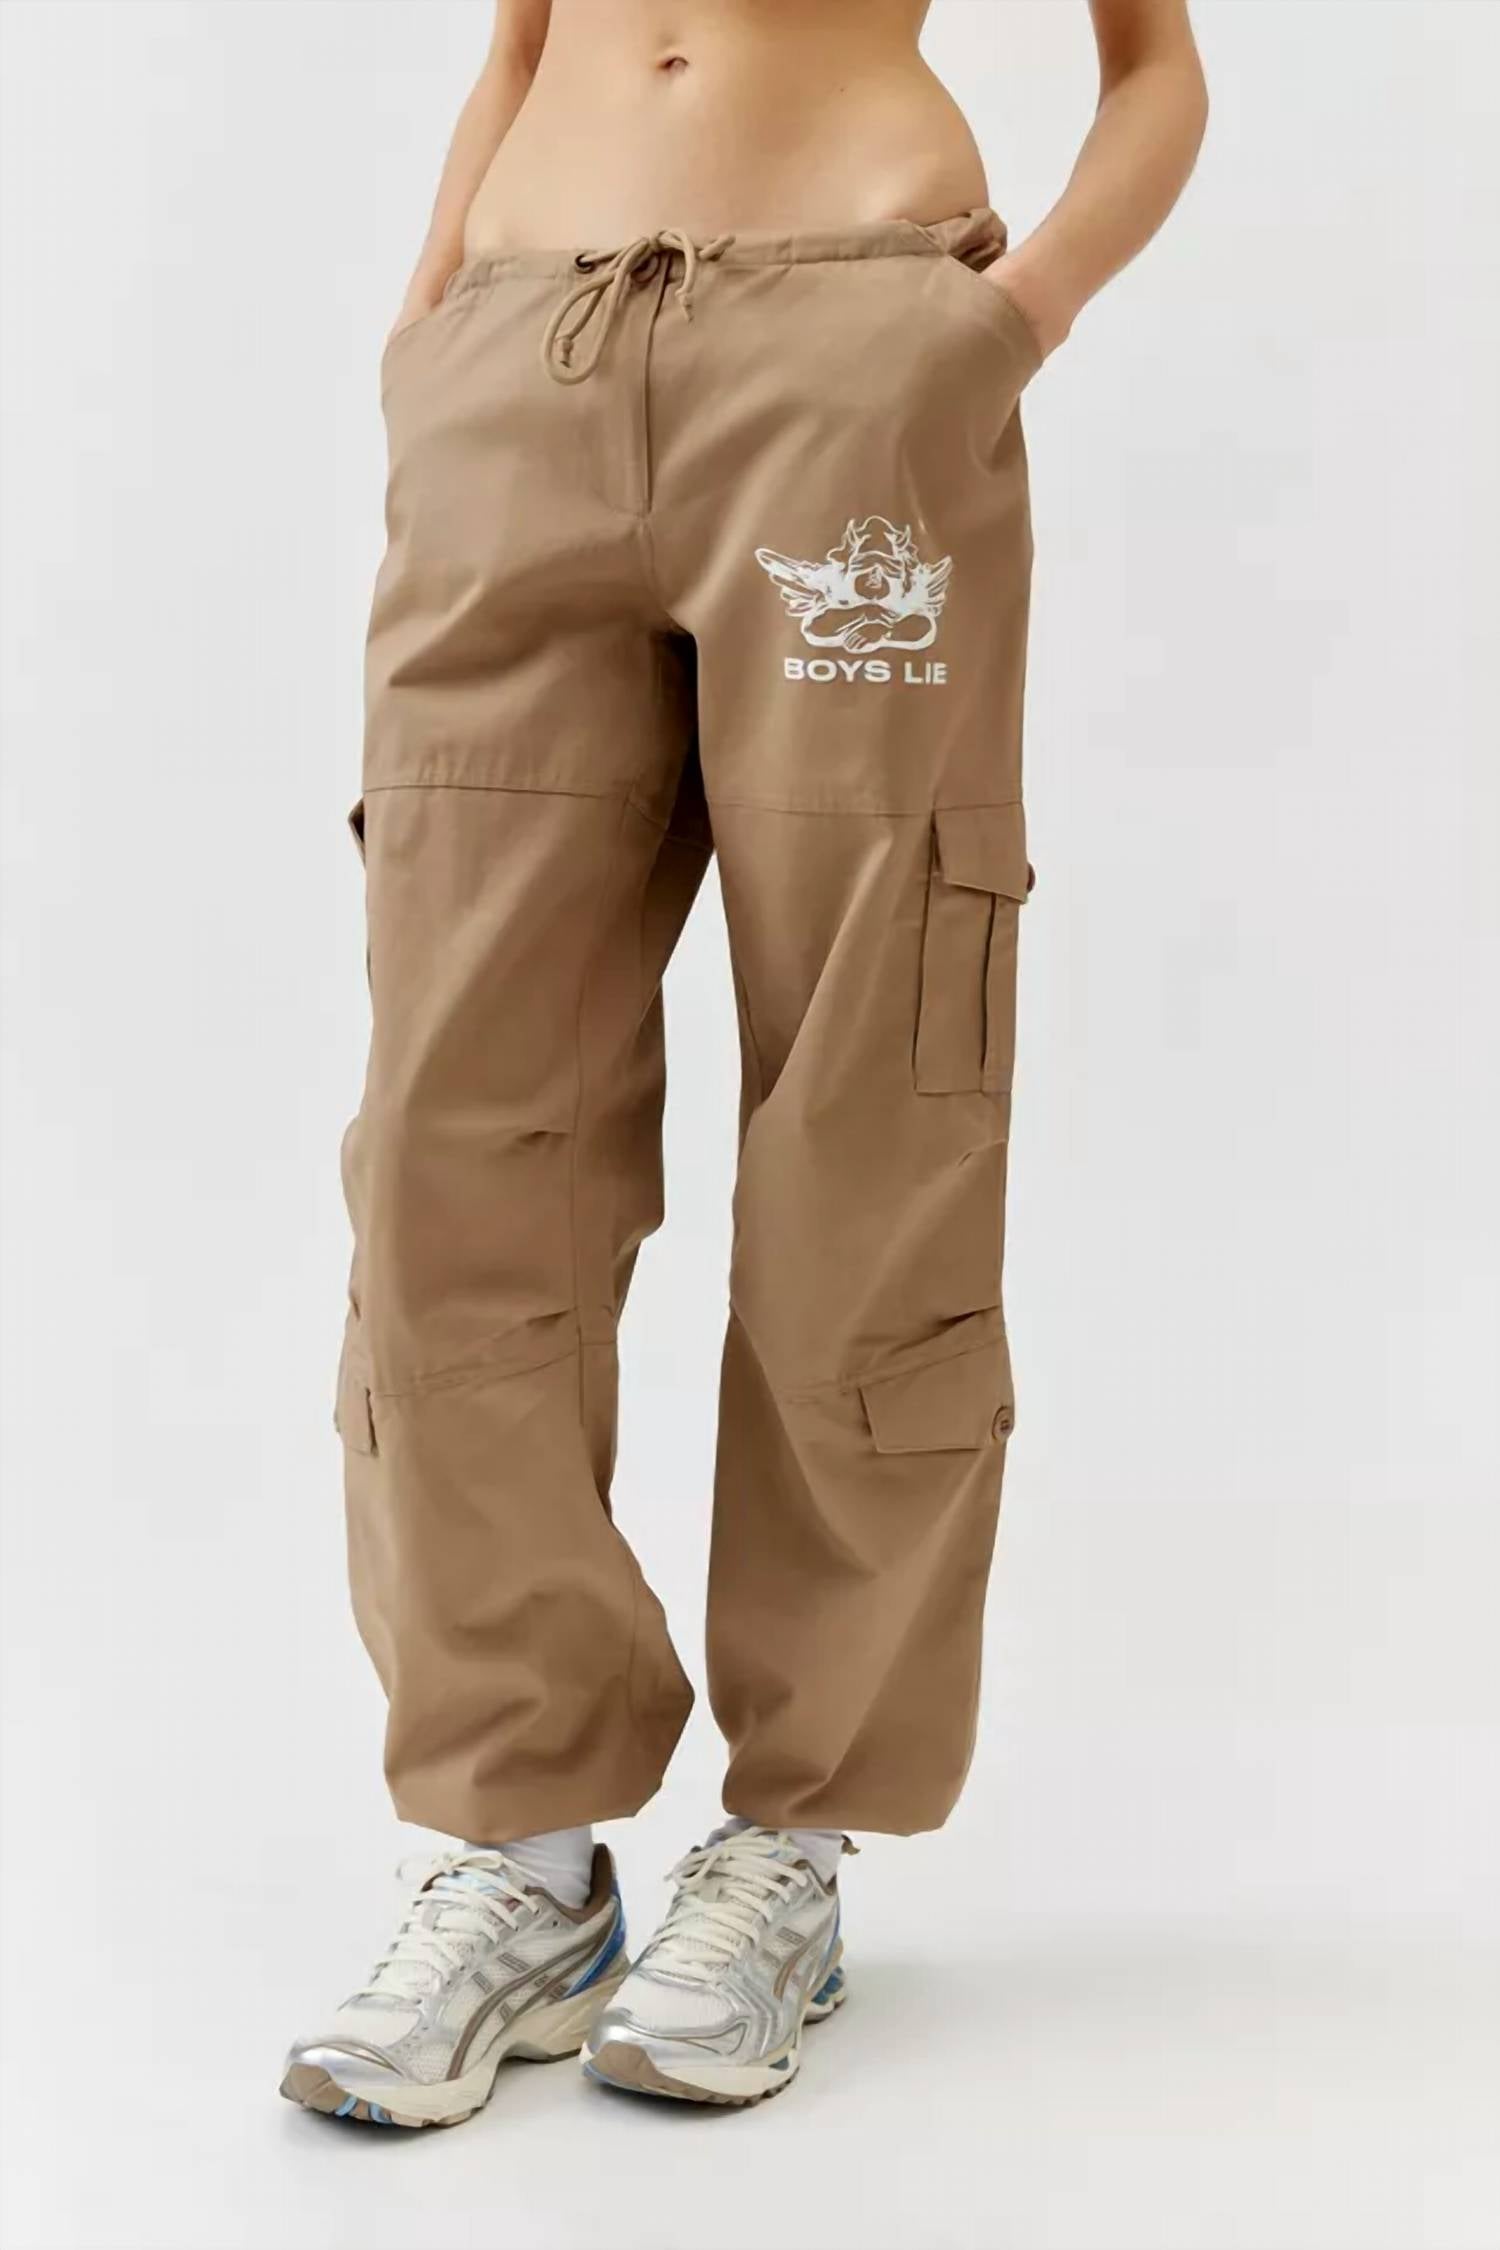 Shop Boys Lie Hits Different Pants In Brown